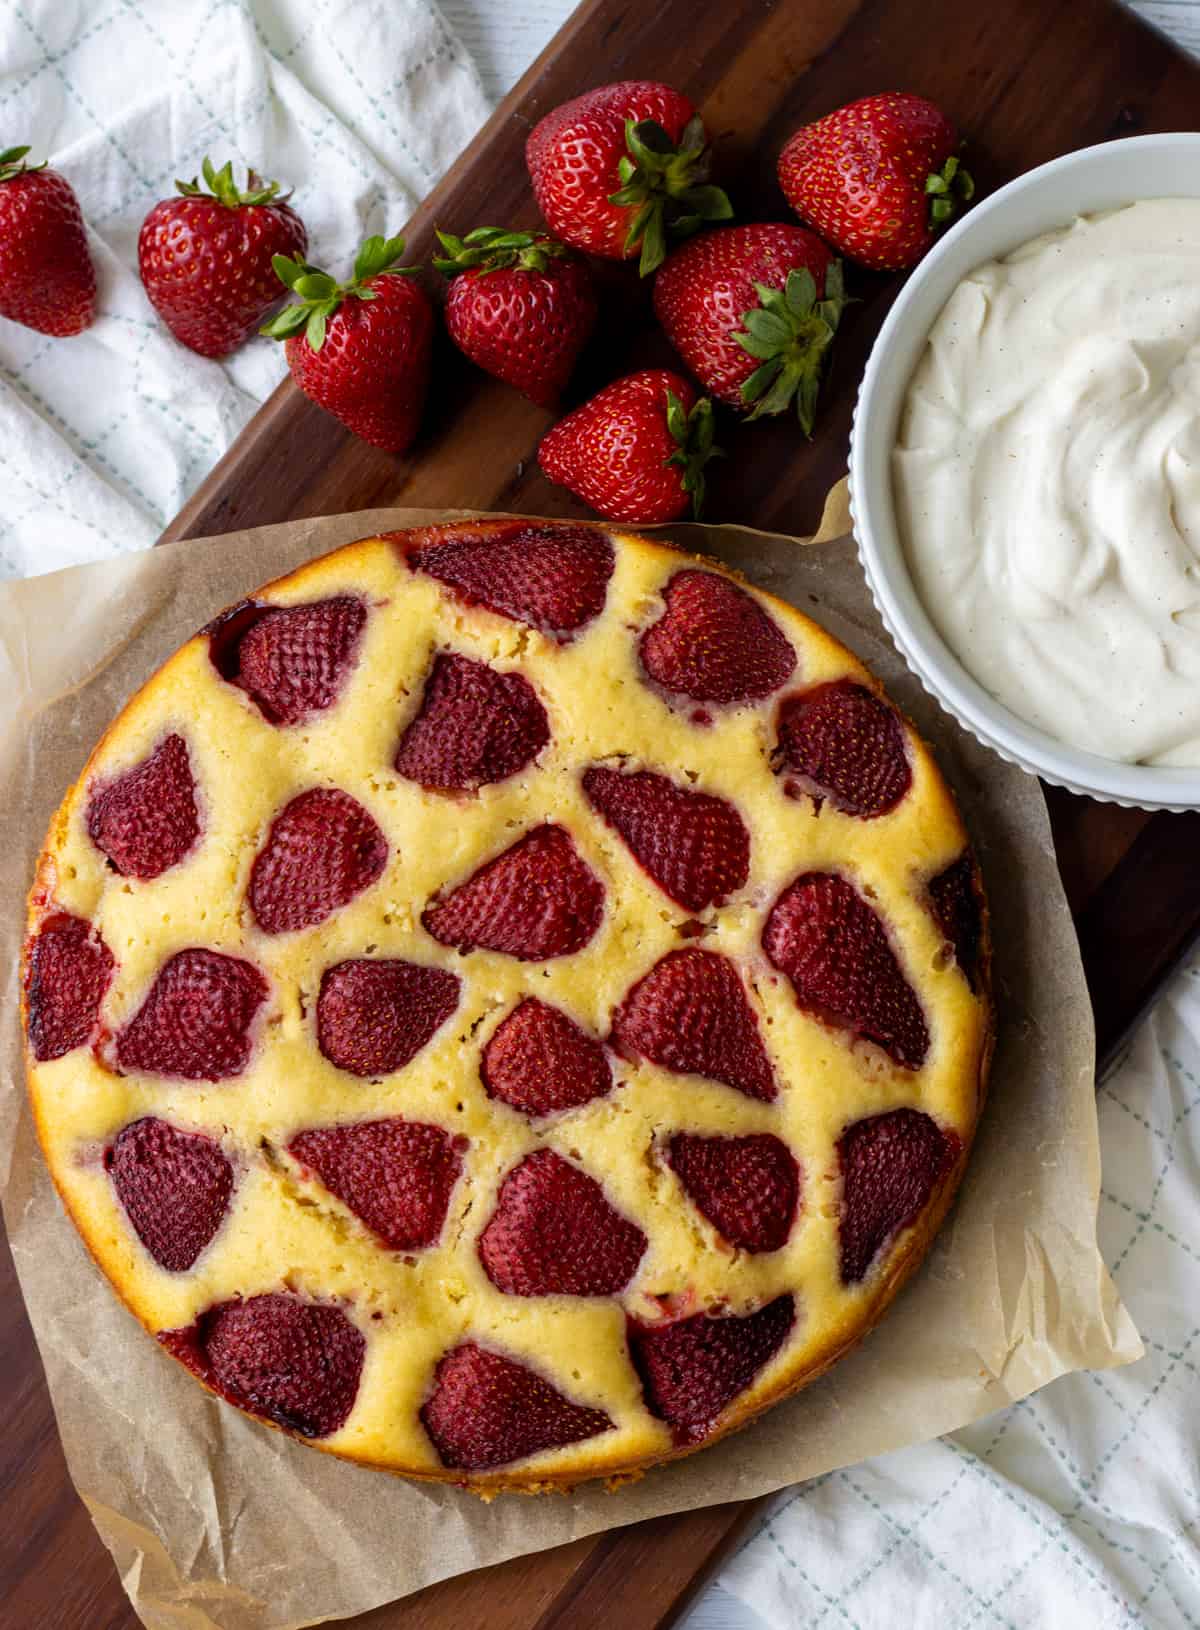 Strawberry studded one layer vanilla cake on a wood platter next to a bowl of whipped cream and fresh strawberries.